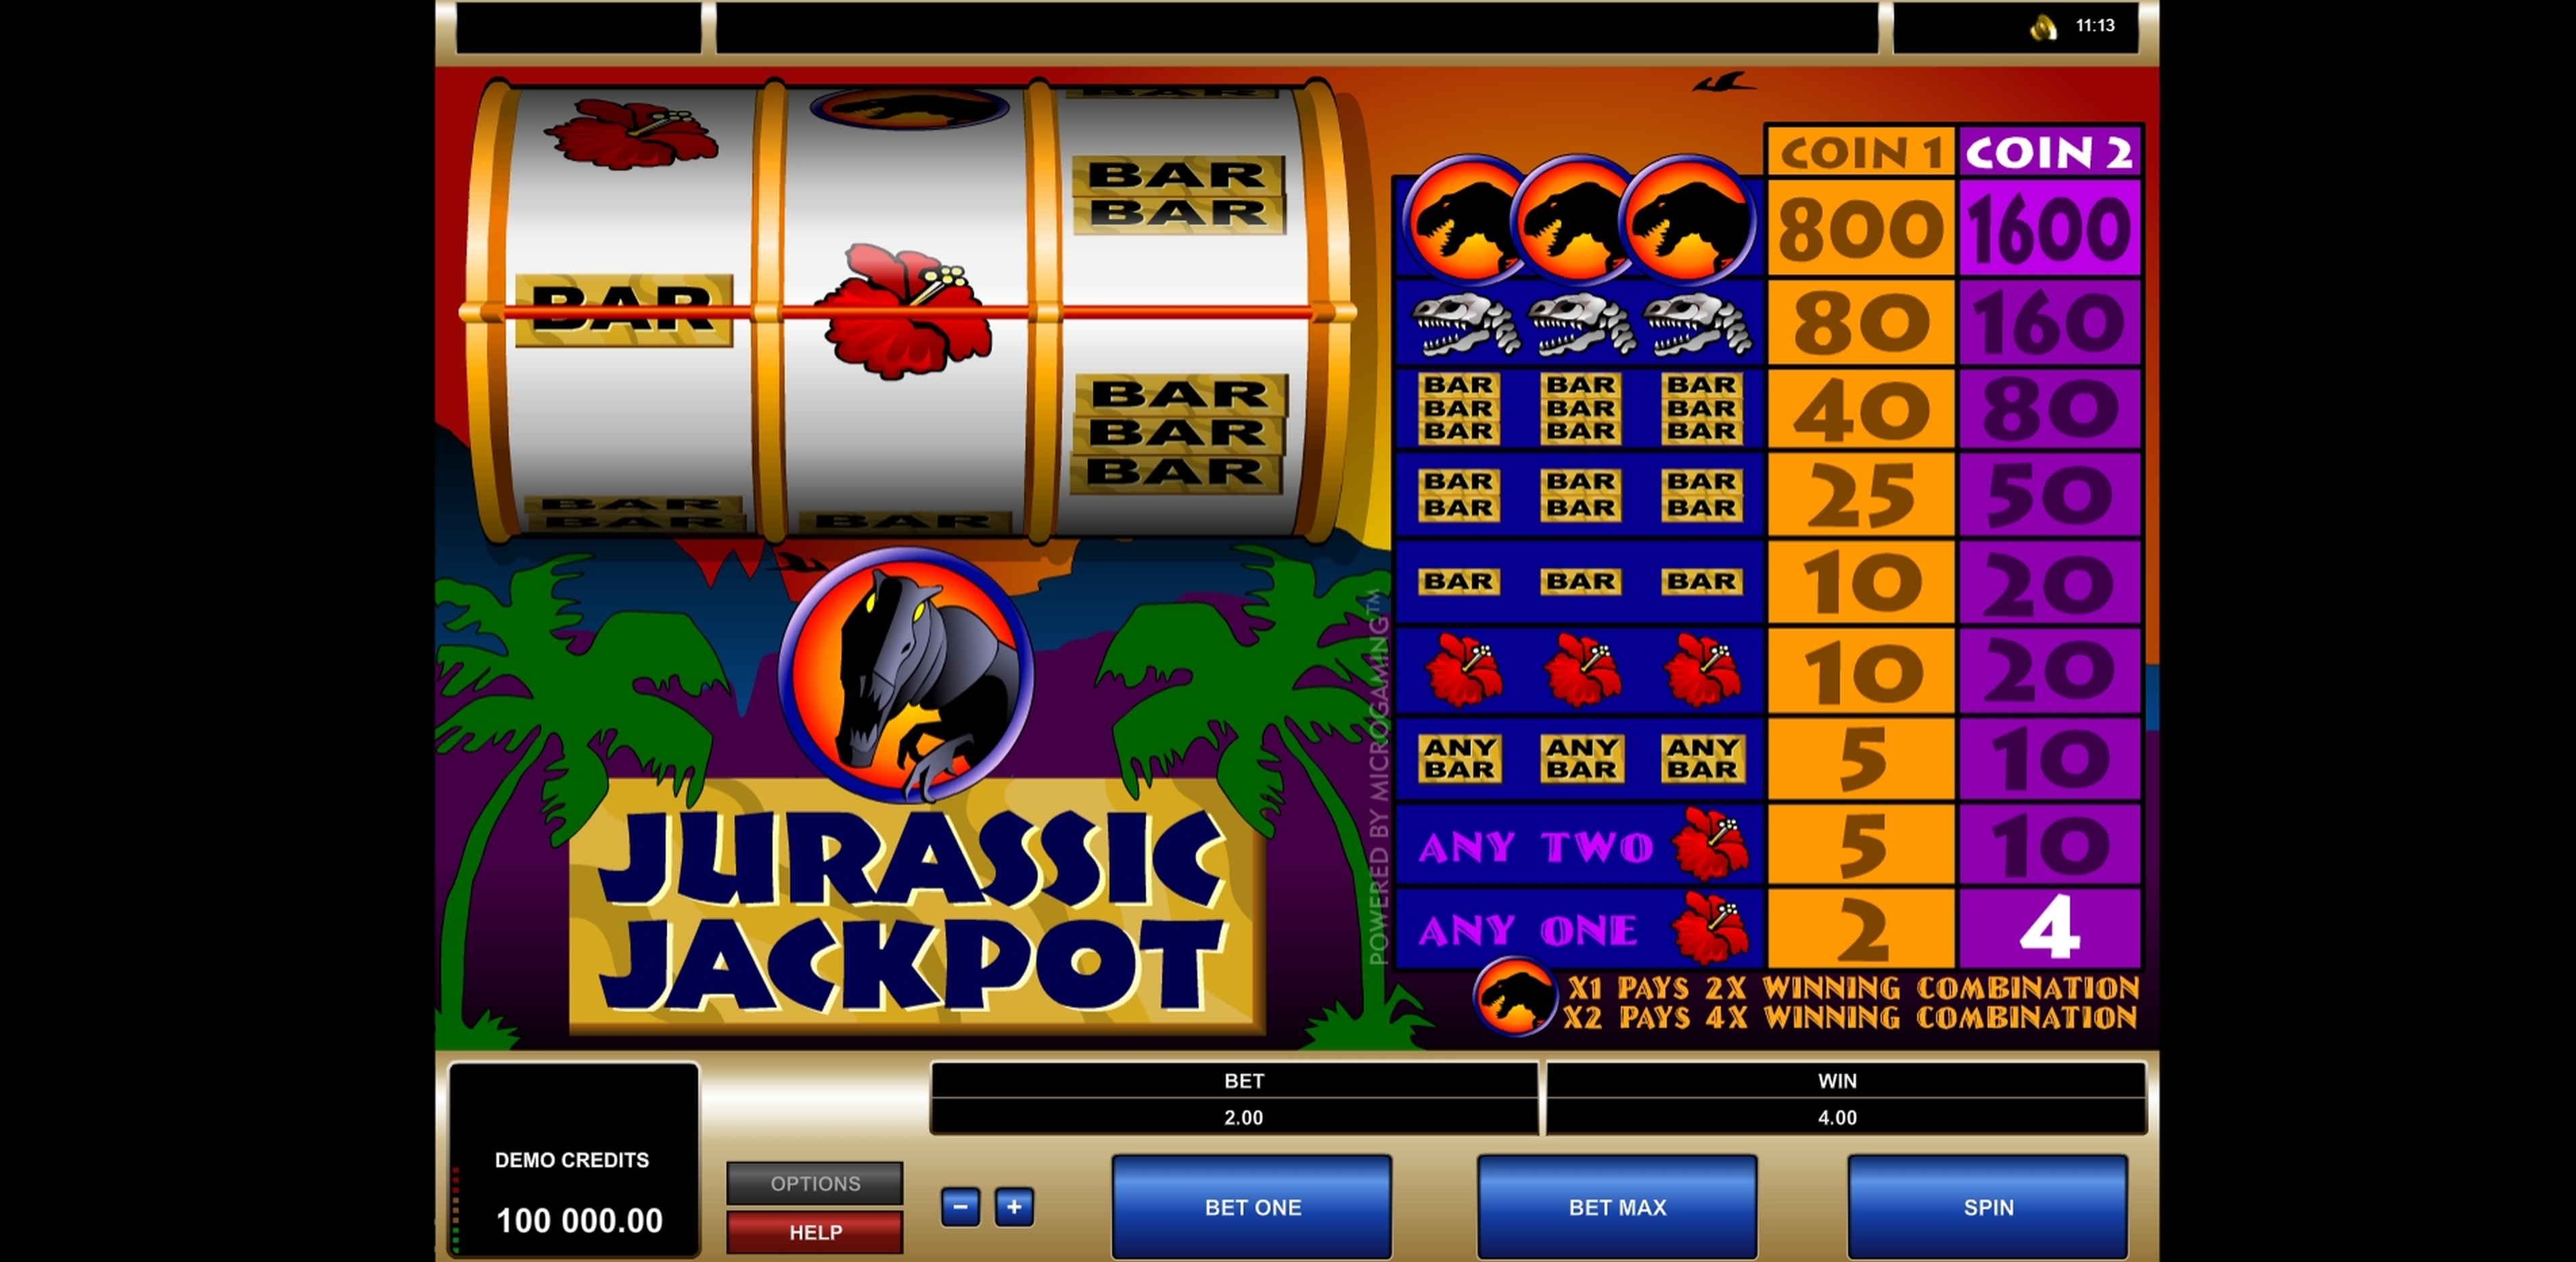 Win Money in Jurassic Jackpot Free Slot Game by Microgaming